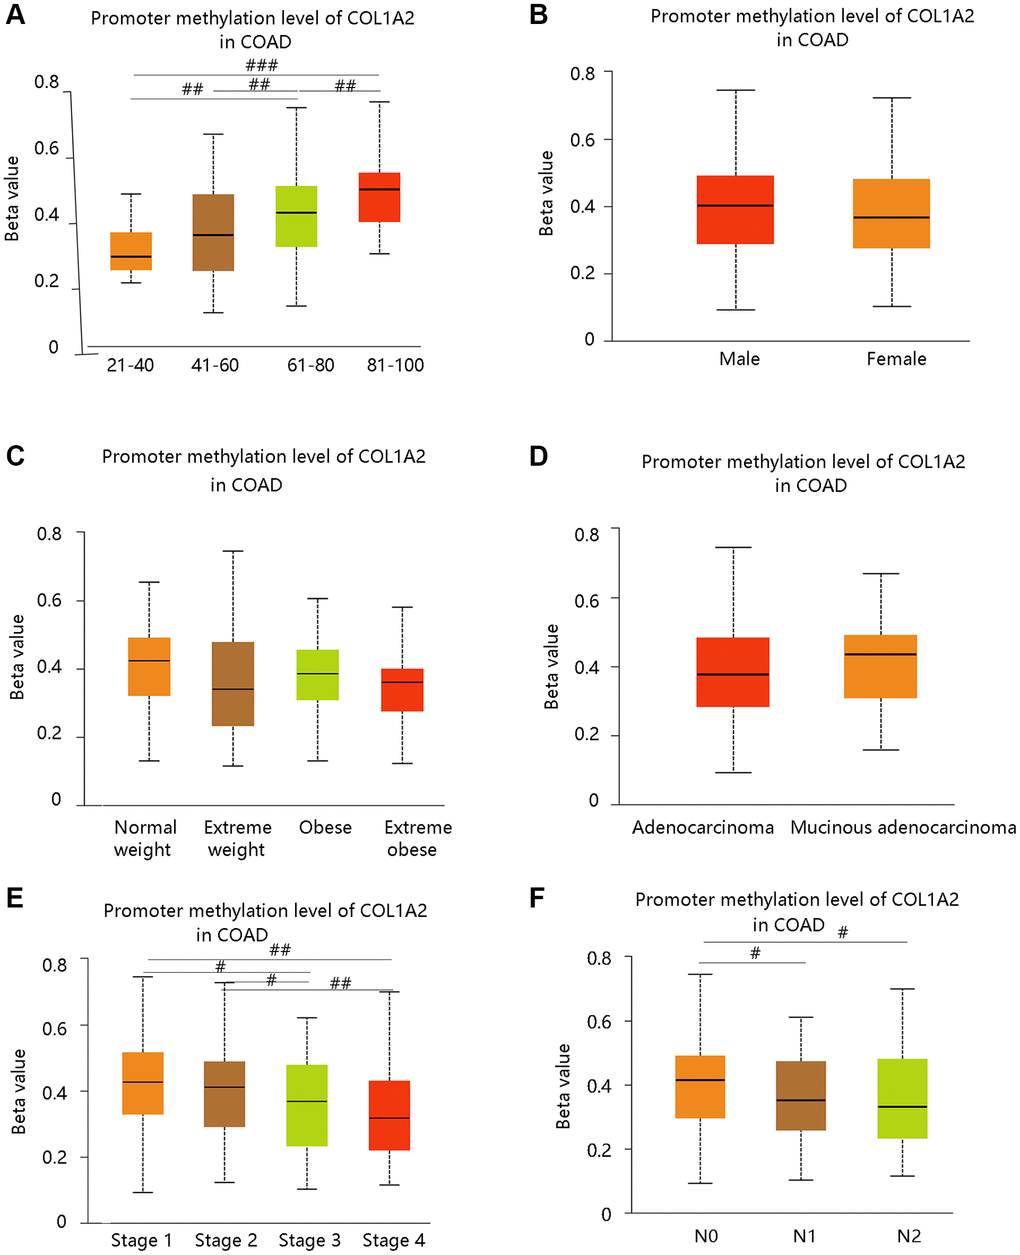 The COL1A2 promoter methylation level in colon adenocarcinoma based on various clinicopathological parameters. (A) Age. (B) Gender. (C) Weight. Normal weight: 18.5 ≤ BMI  40. Abbreviation: BMI: body-mass-index. (D) Histological subtypes. (E) Cancer stage. (F) Nodal metastasis status. #P ##P ###P 